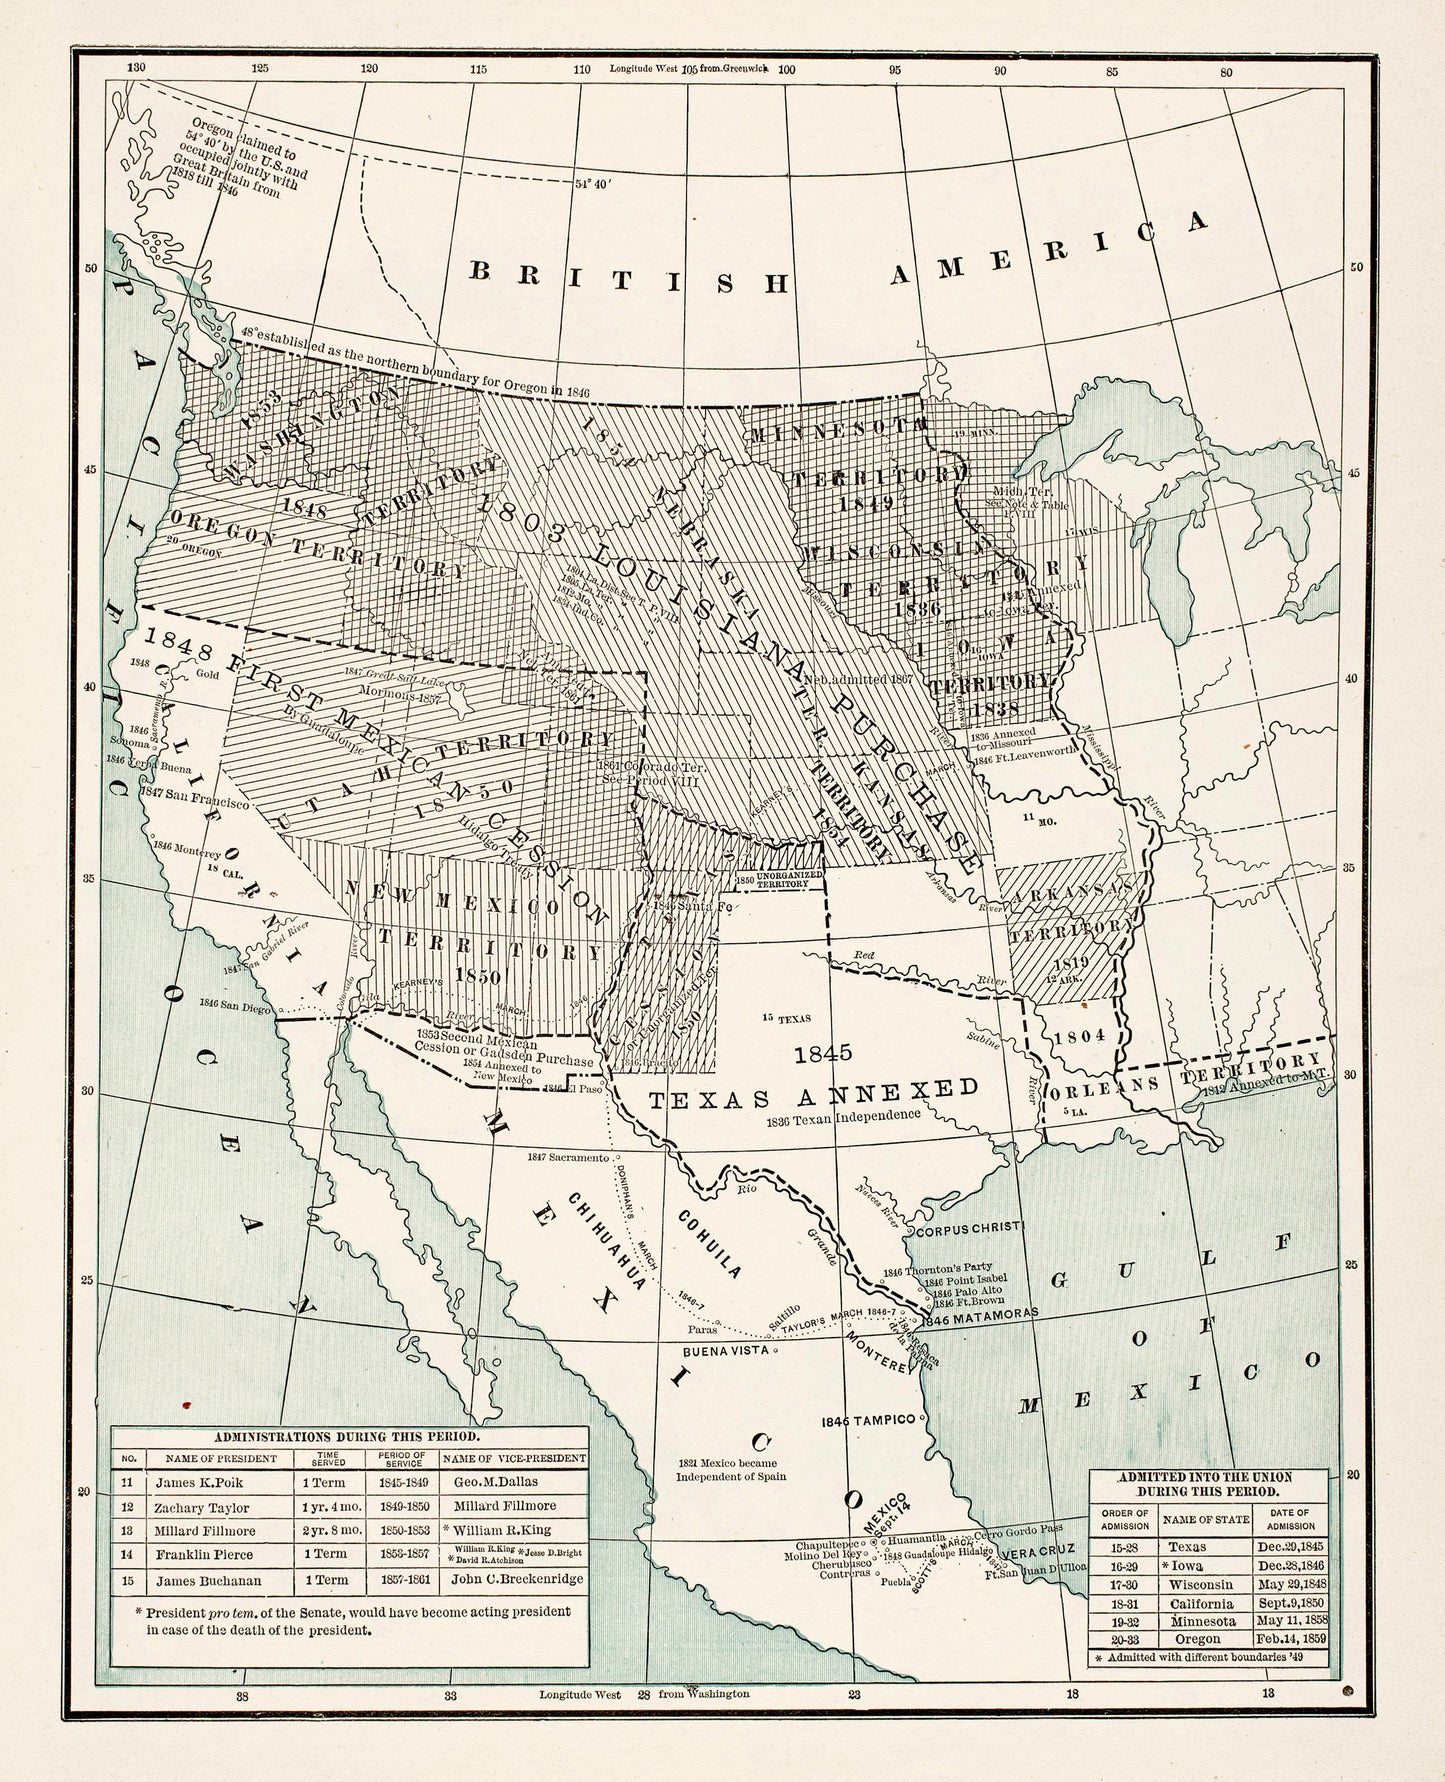 Cram's Unrivaled Family Atlas of the World Historic America [9 Images]